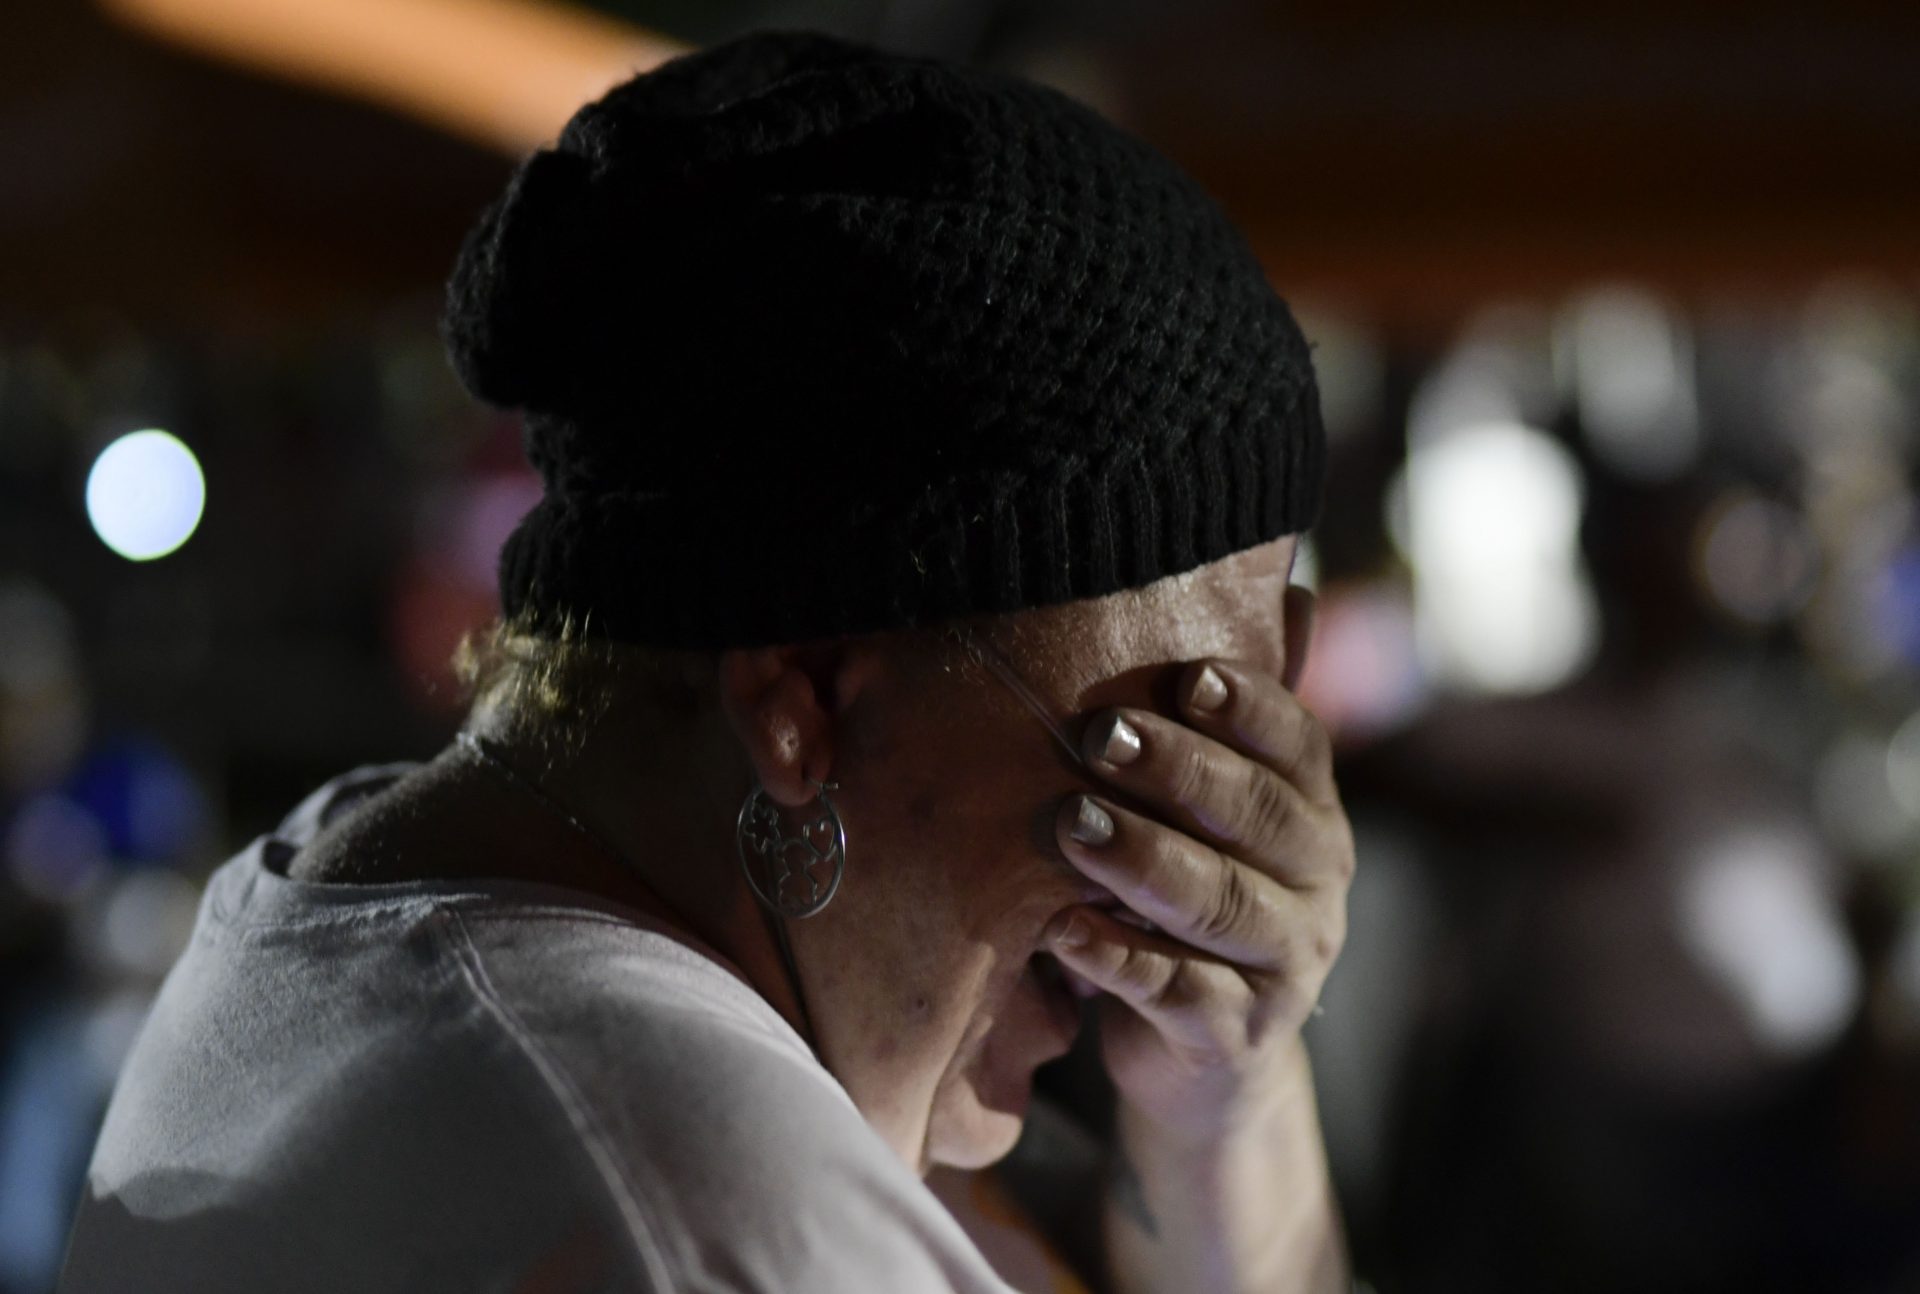 Maritza QuiÃ±ones Rodriguez, 51 years-old, cries as she and other neighbors remain outdoors using camping tents and portable lights for fear of possible aftershocks after a 6.4-magnitude earthquake struck in Guanica, Puerto Rico, Tuesday, Jan. 7, 2020. The quake was followed by a series of strong aftershocks, part of a 10-day series of temblors spawned by the grinding of tectonic plates along three faults beneath southern Puerto Rico.